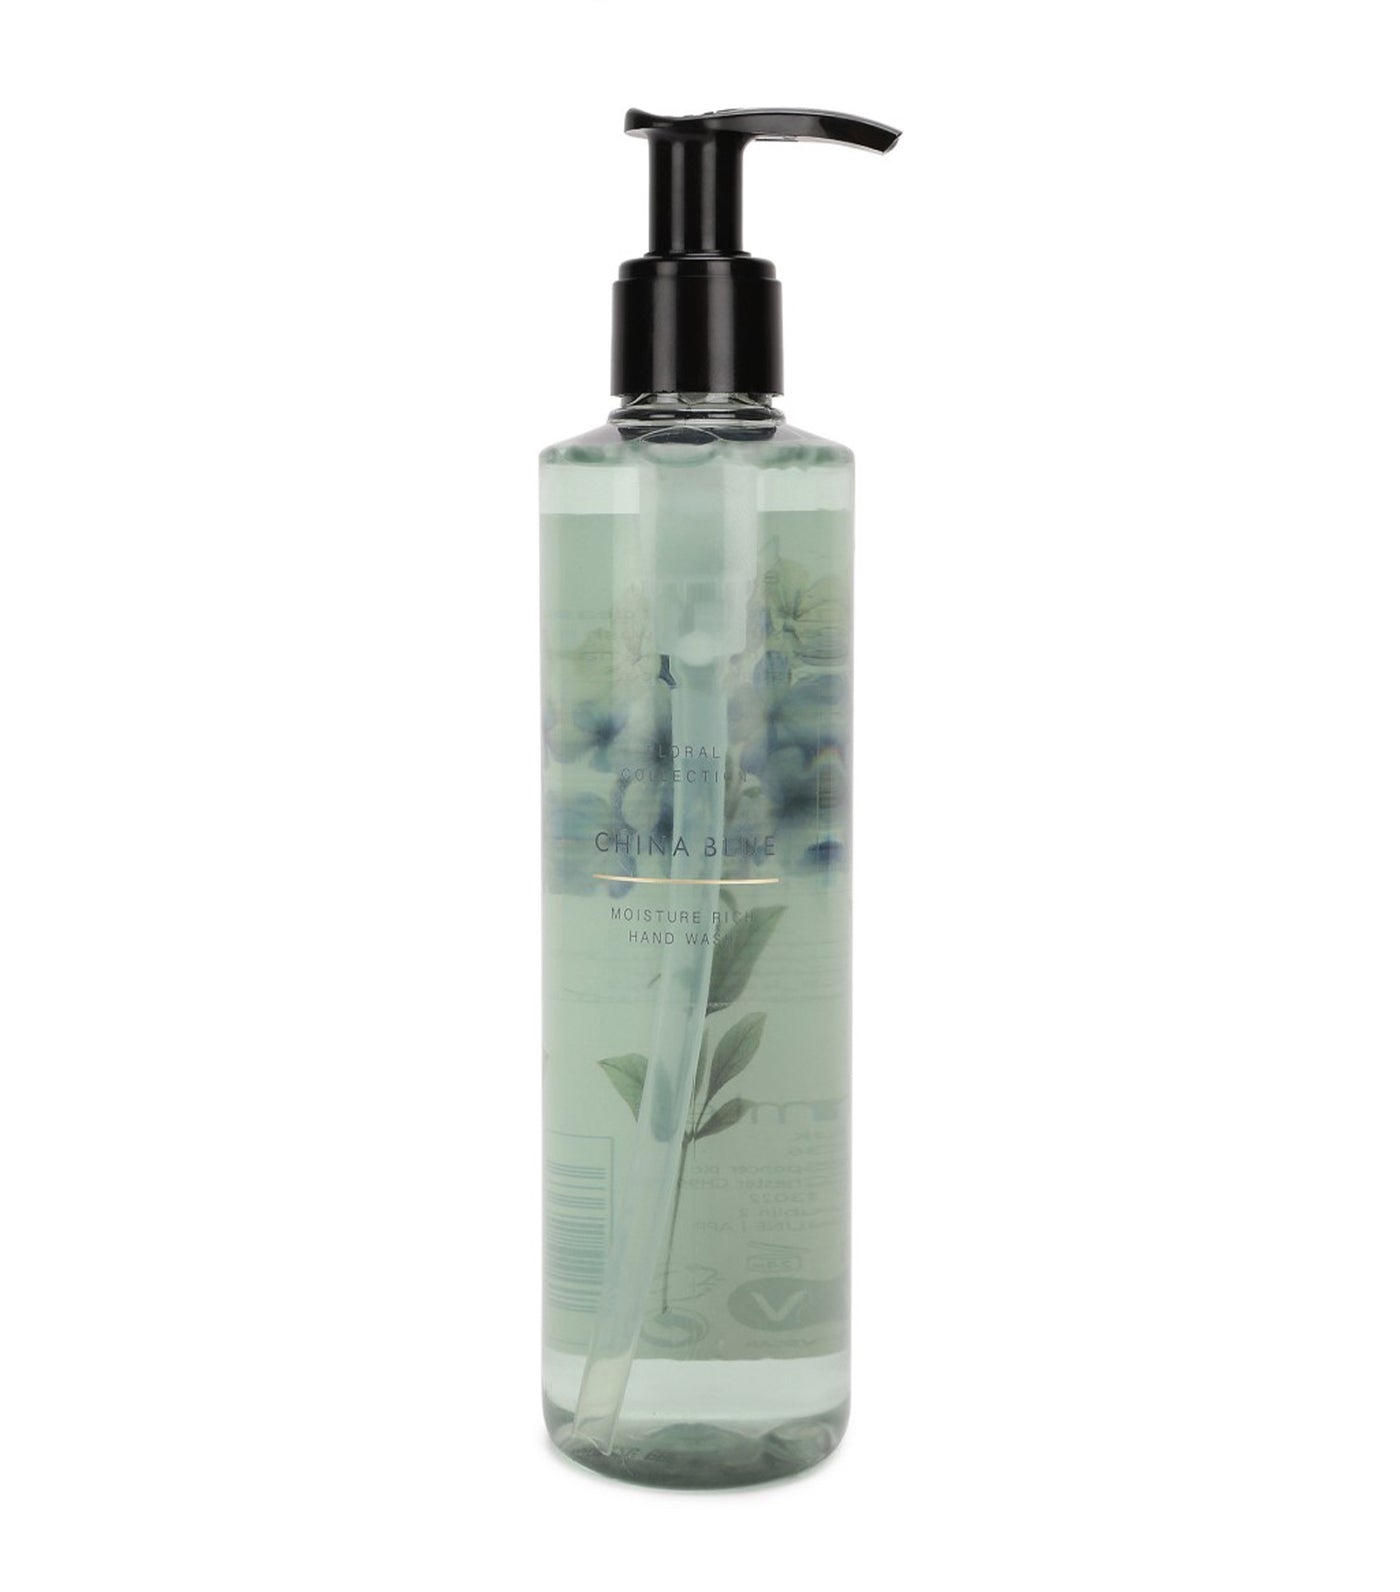 Floral China Blue Hand Wash